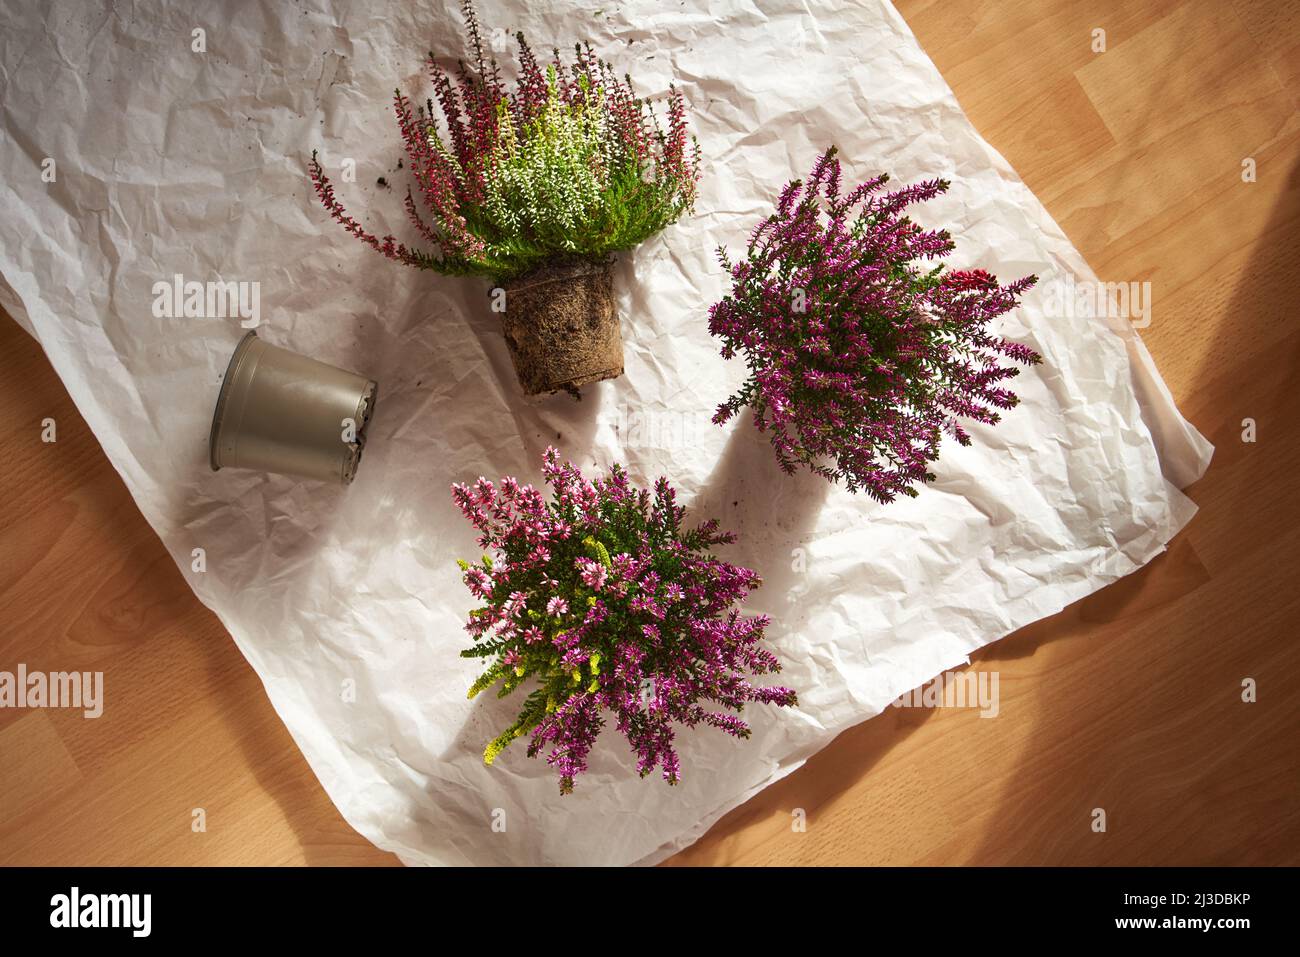 Fresh blooming heather plants are being replanted at home in autumn, top view Stock Photo